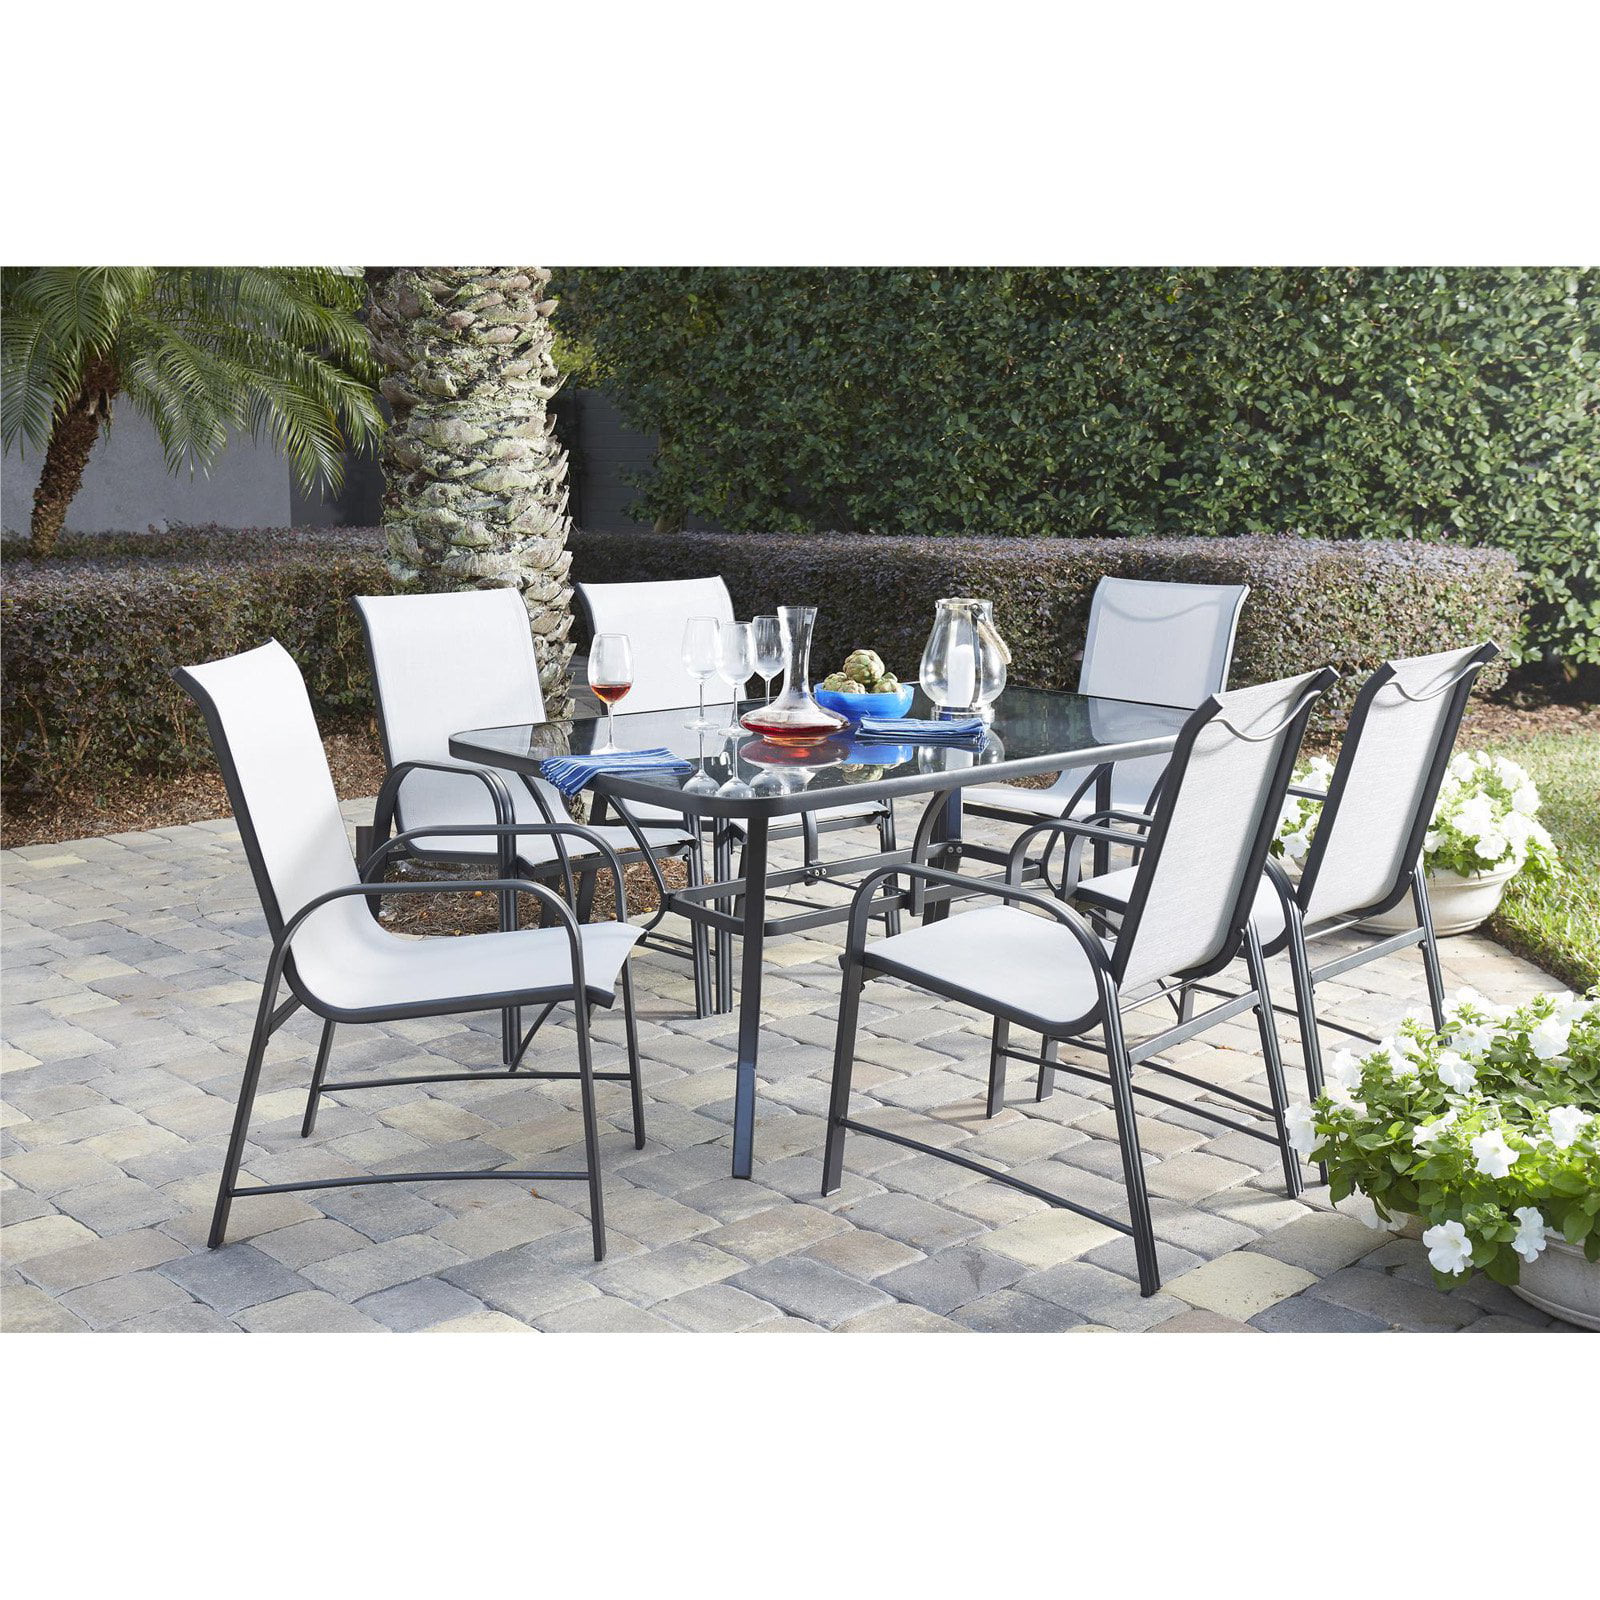 cosco paloma outdoor patio dining set, 7 piece table and chairs